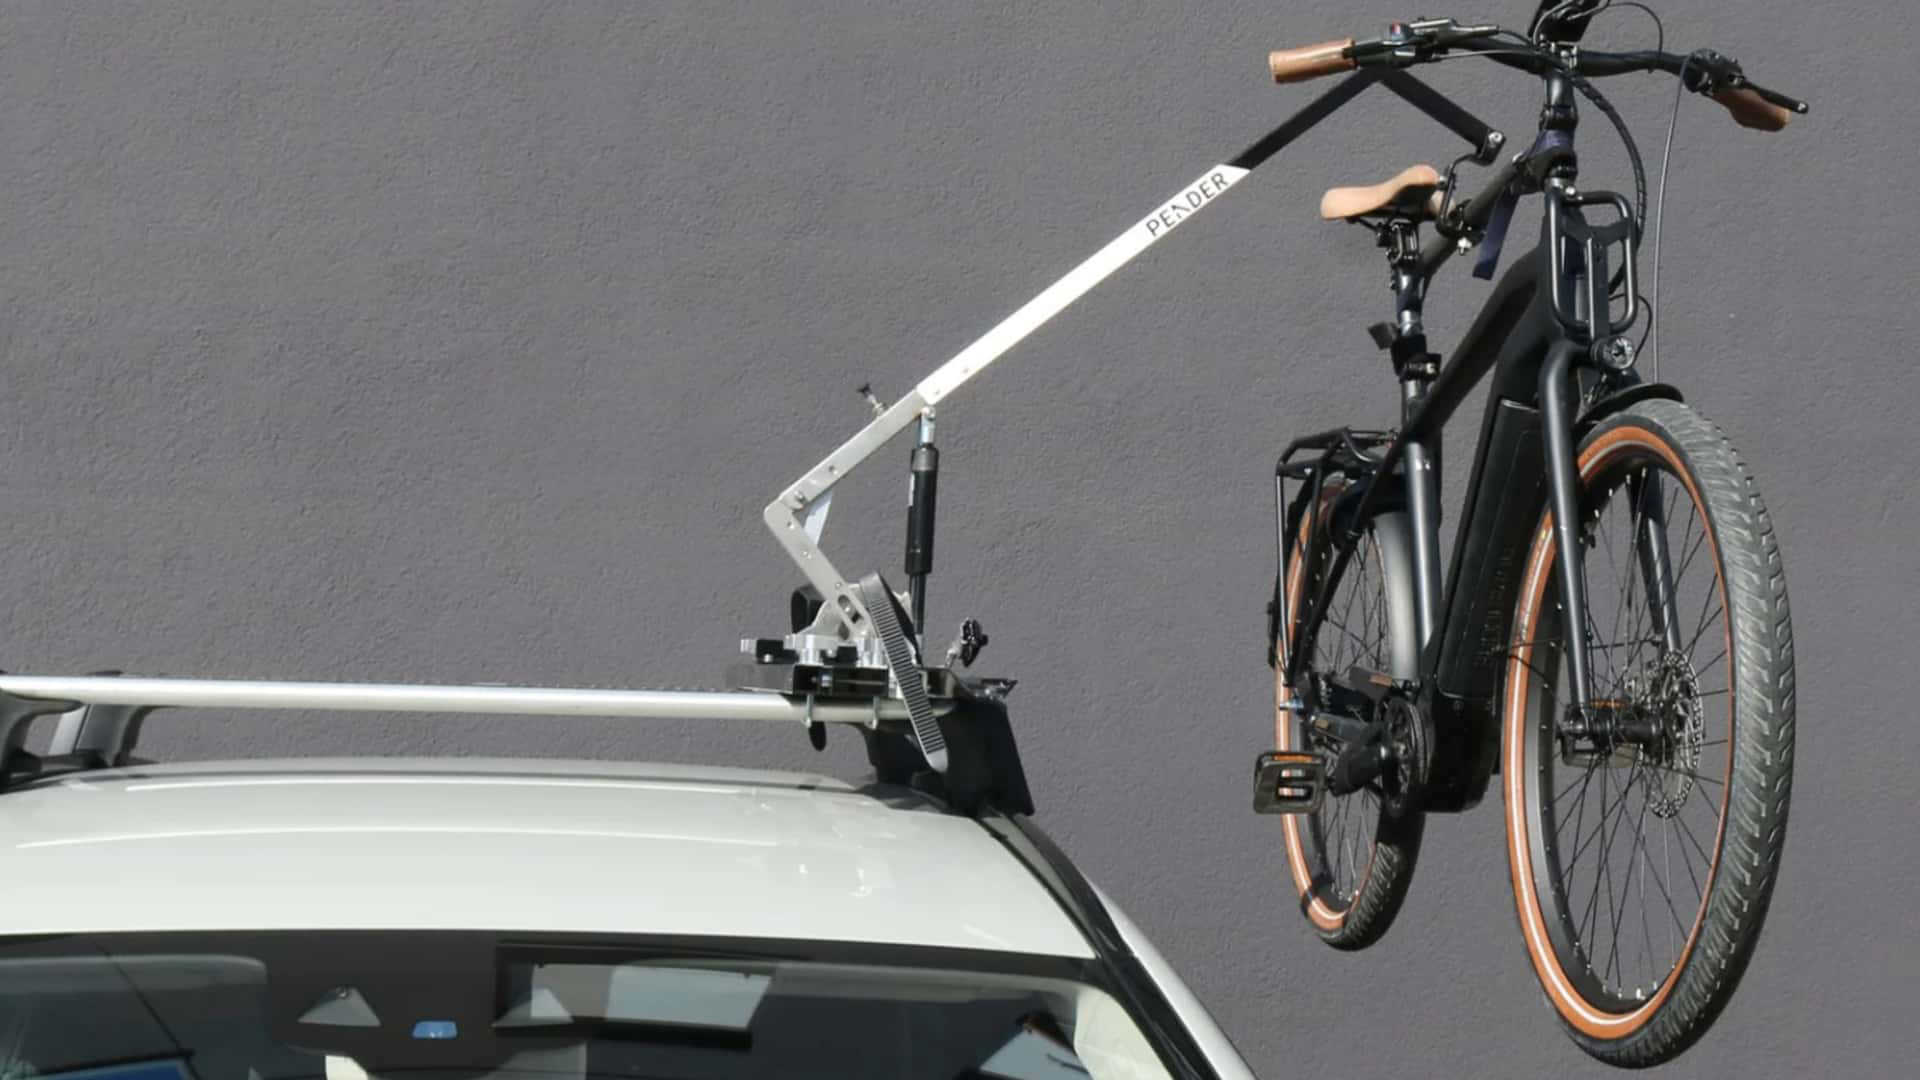 This E Bike Rack Lifts Your Bike Onto Your Vehicles Roof For You